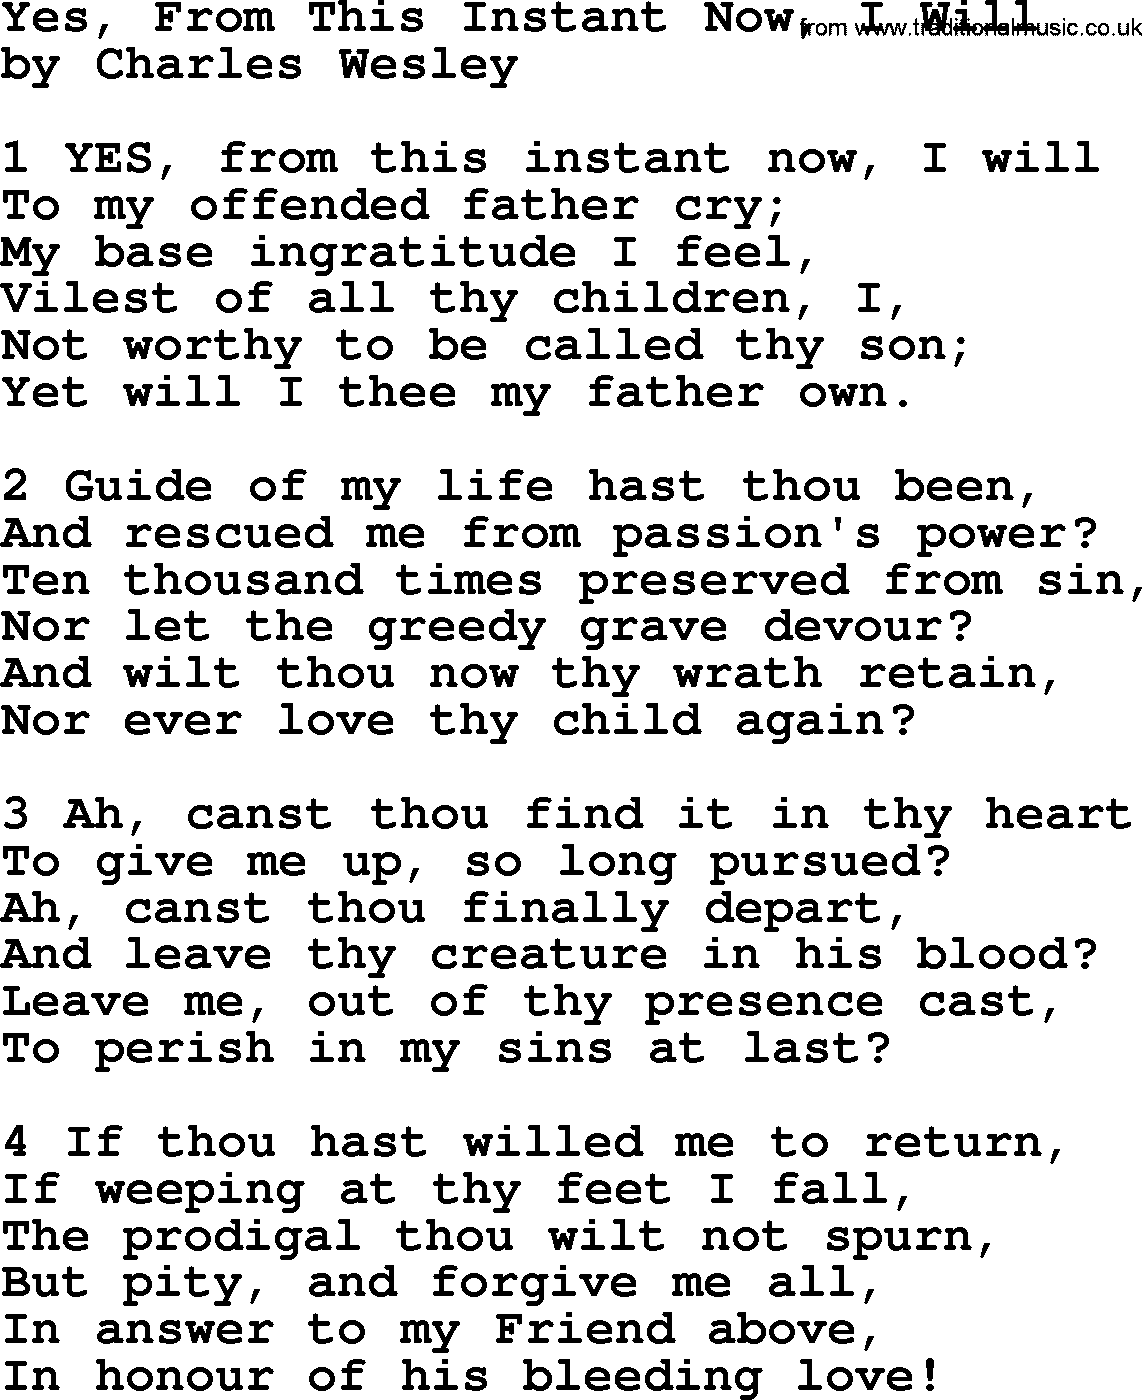 Charles Wesley hymn: Yes, From This Instant Now, I Will, lyrics